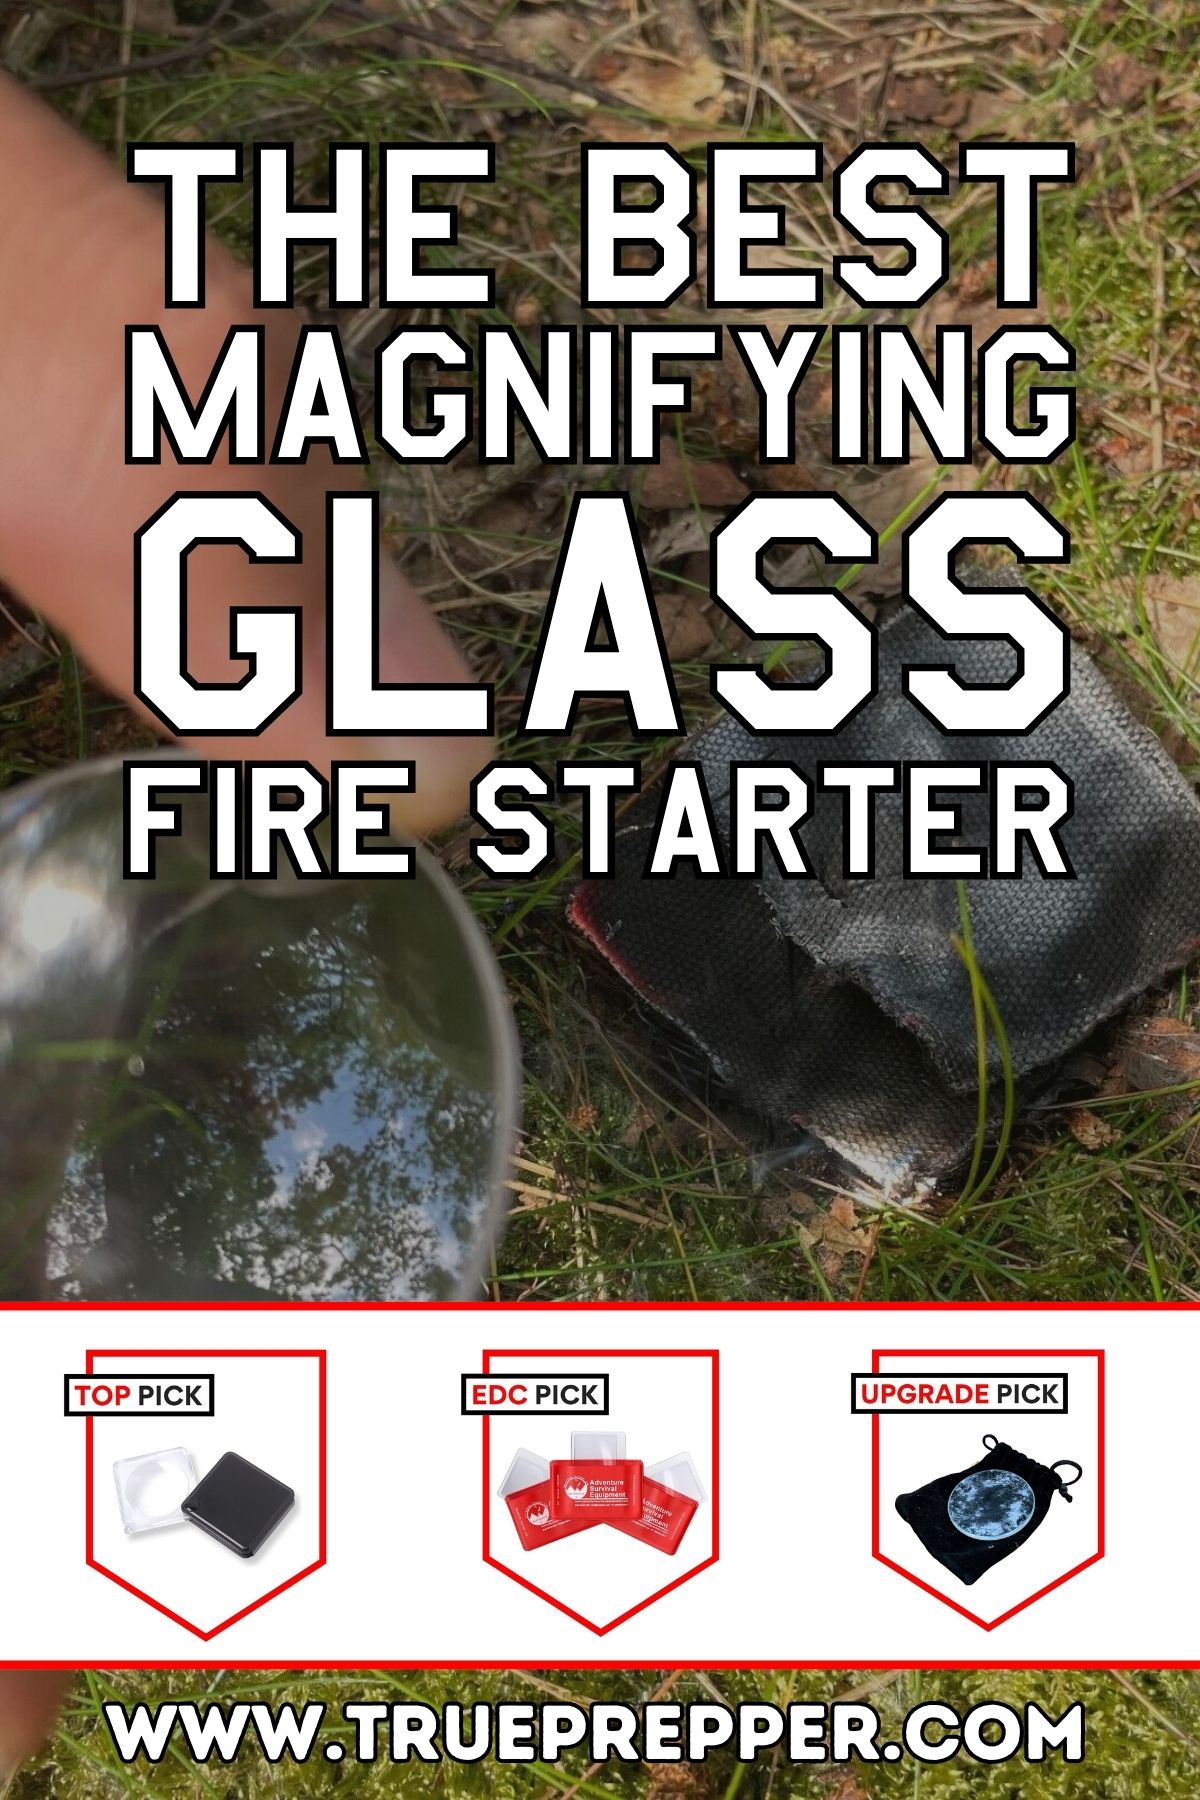 The Best Magnifying Glass Fire Starter